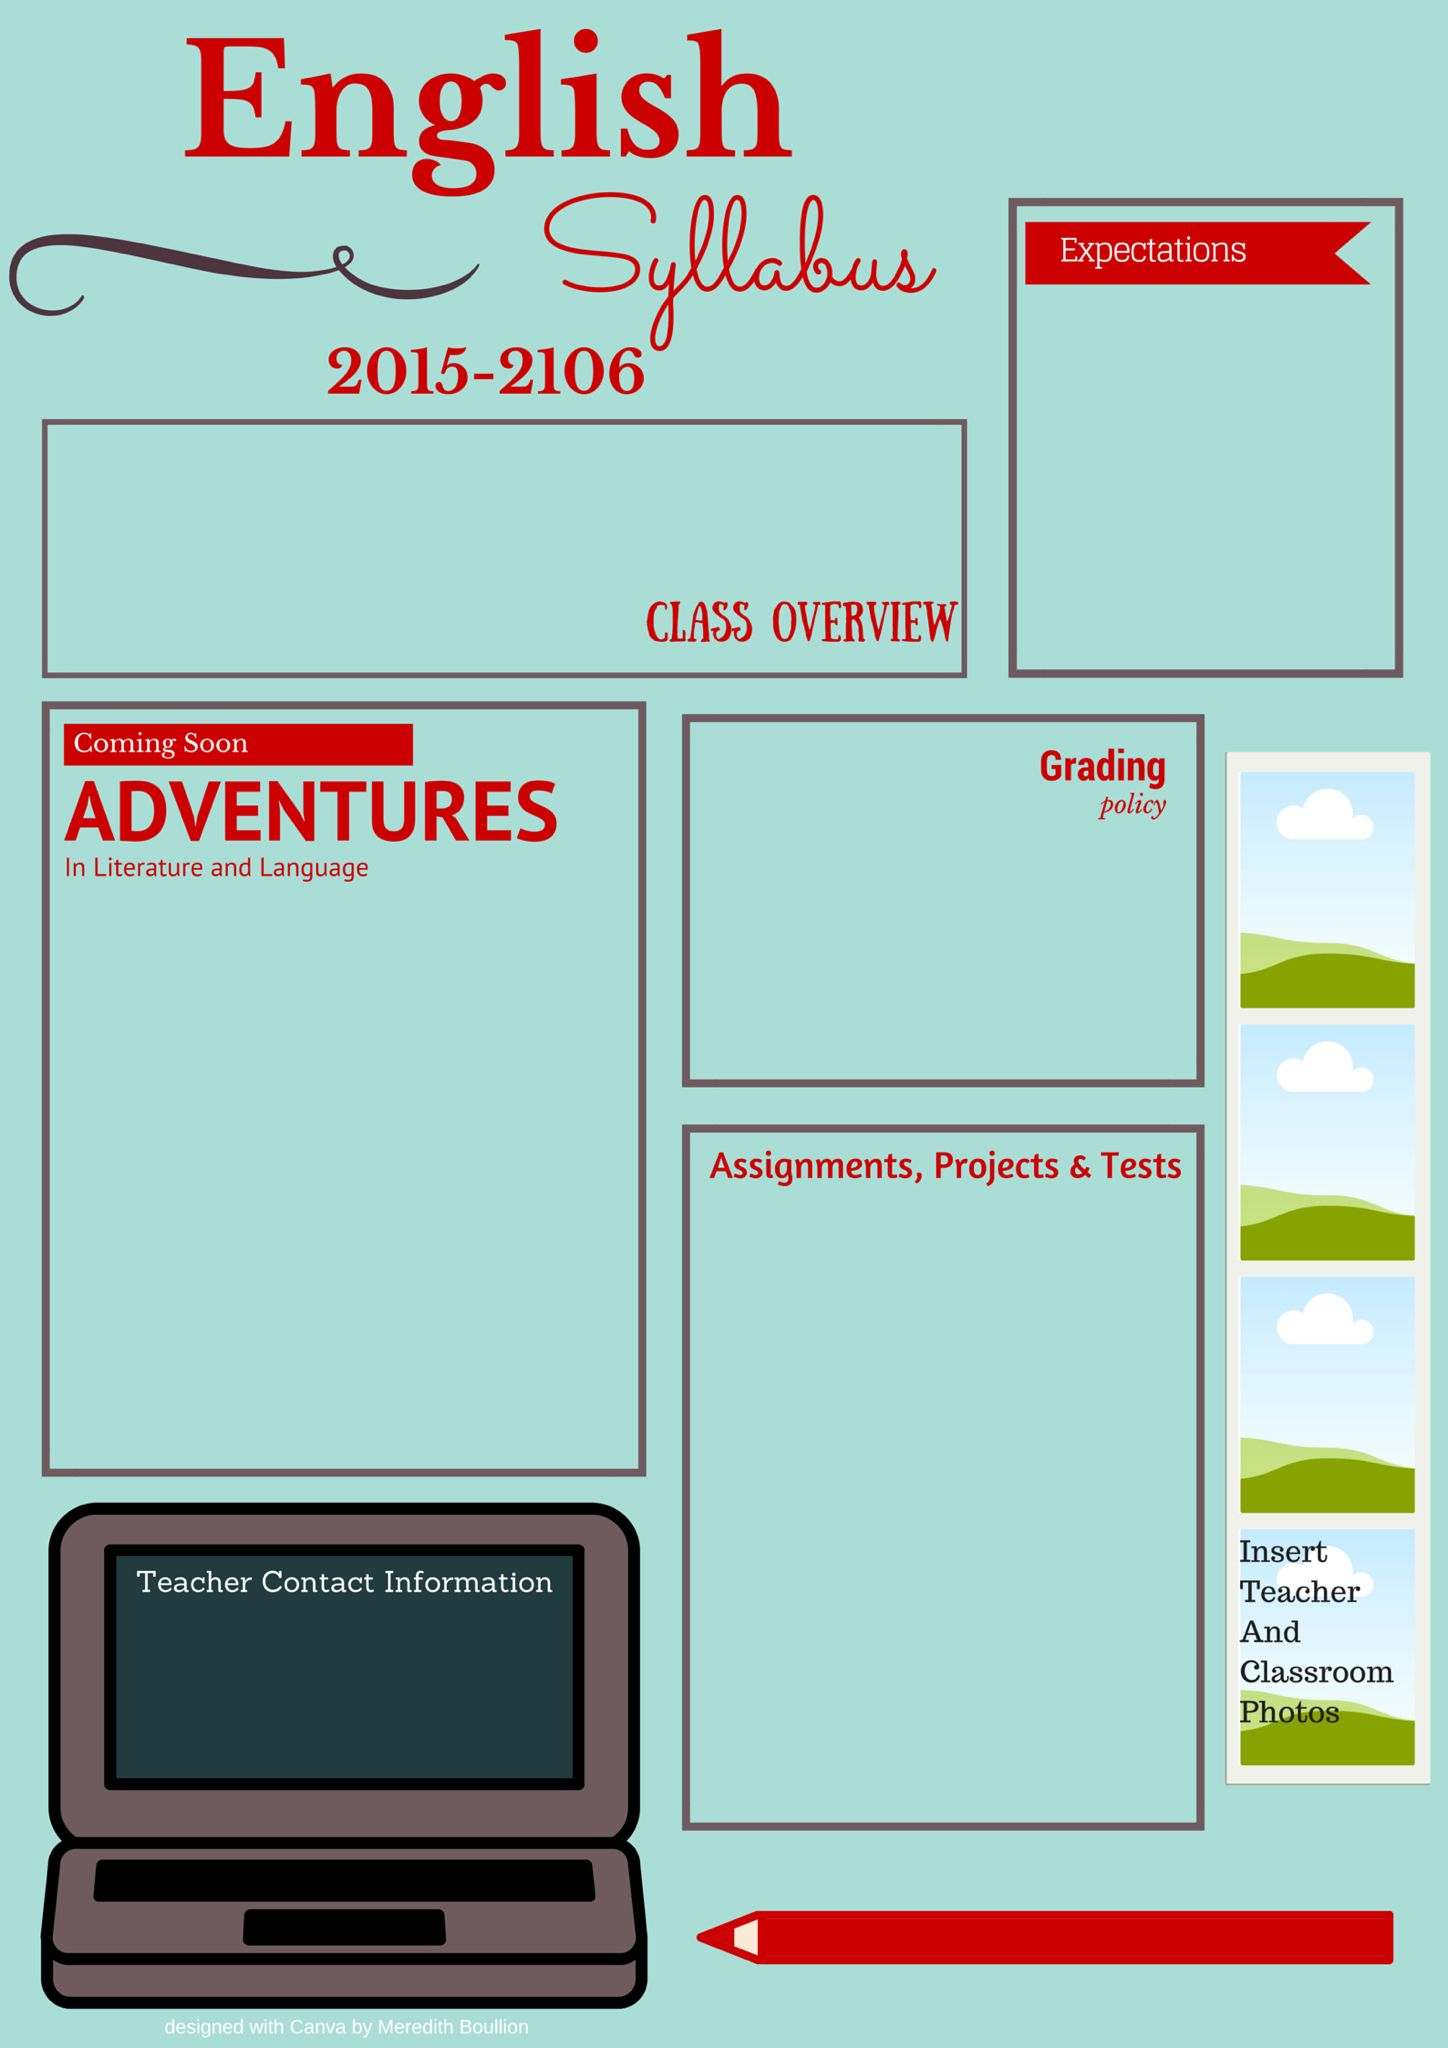 Visual Syllabus Template Made With Canva | Middle School In Blank Syllabus Template